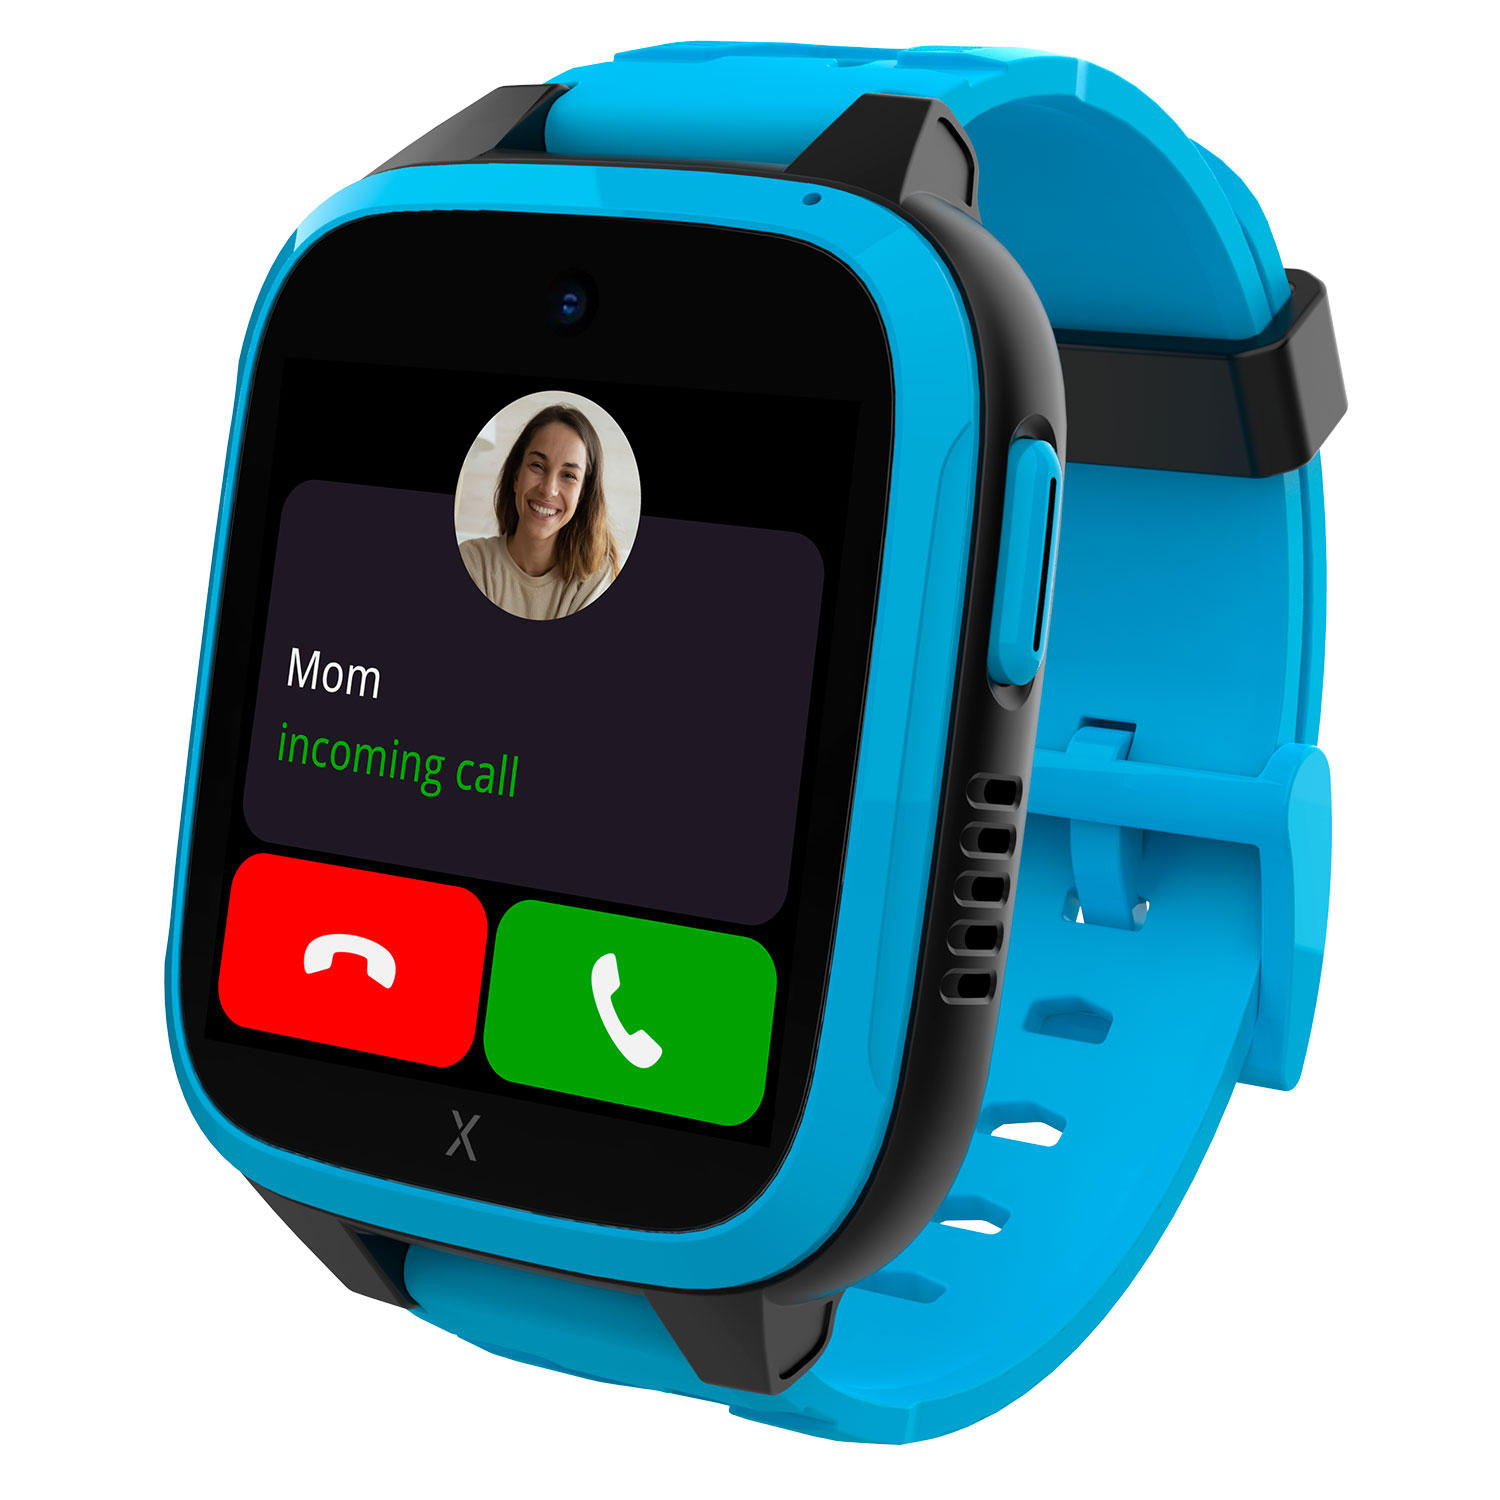 XGO3 Blue Kids Smart Watch Cell Phone with GPS and SIM Card Included - Blue